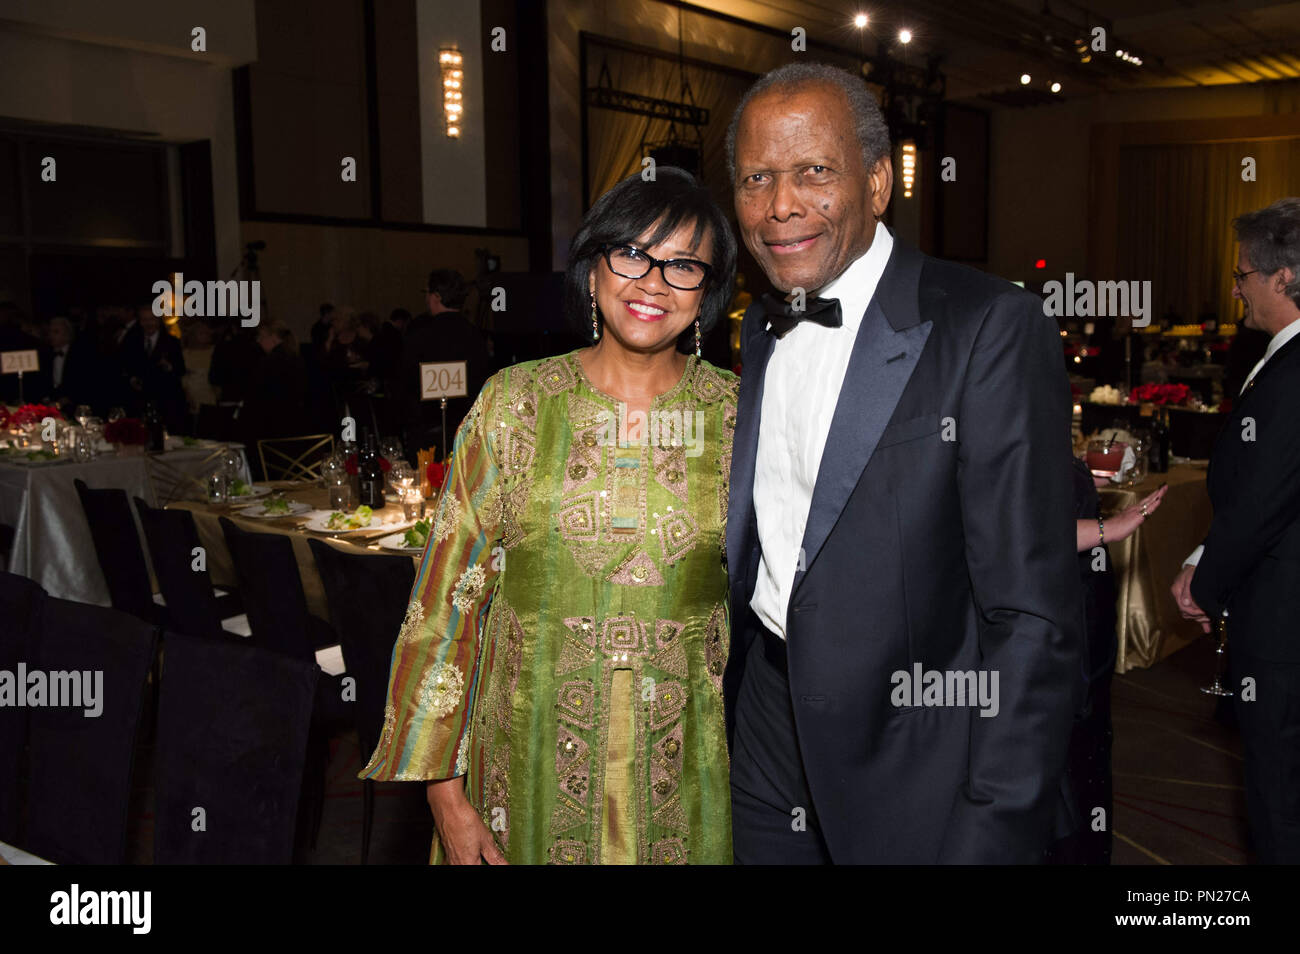 Academy President Cheryl Boone Isaacs (left) and Sidney Poitier attend the 6th Annual Governors Awards in The Ray Dolby Ballroom at Hollywood & Highland Center® in Hollywood, CA, on Saturday, November 8, 2014.  File Reference # 32487 167THA  For Editorial Use Only -  All Rights Reserved Stock Photo